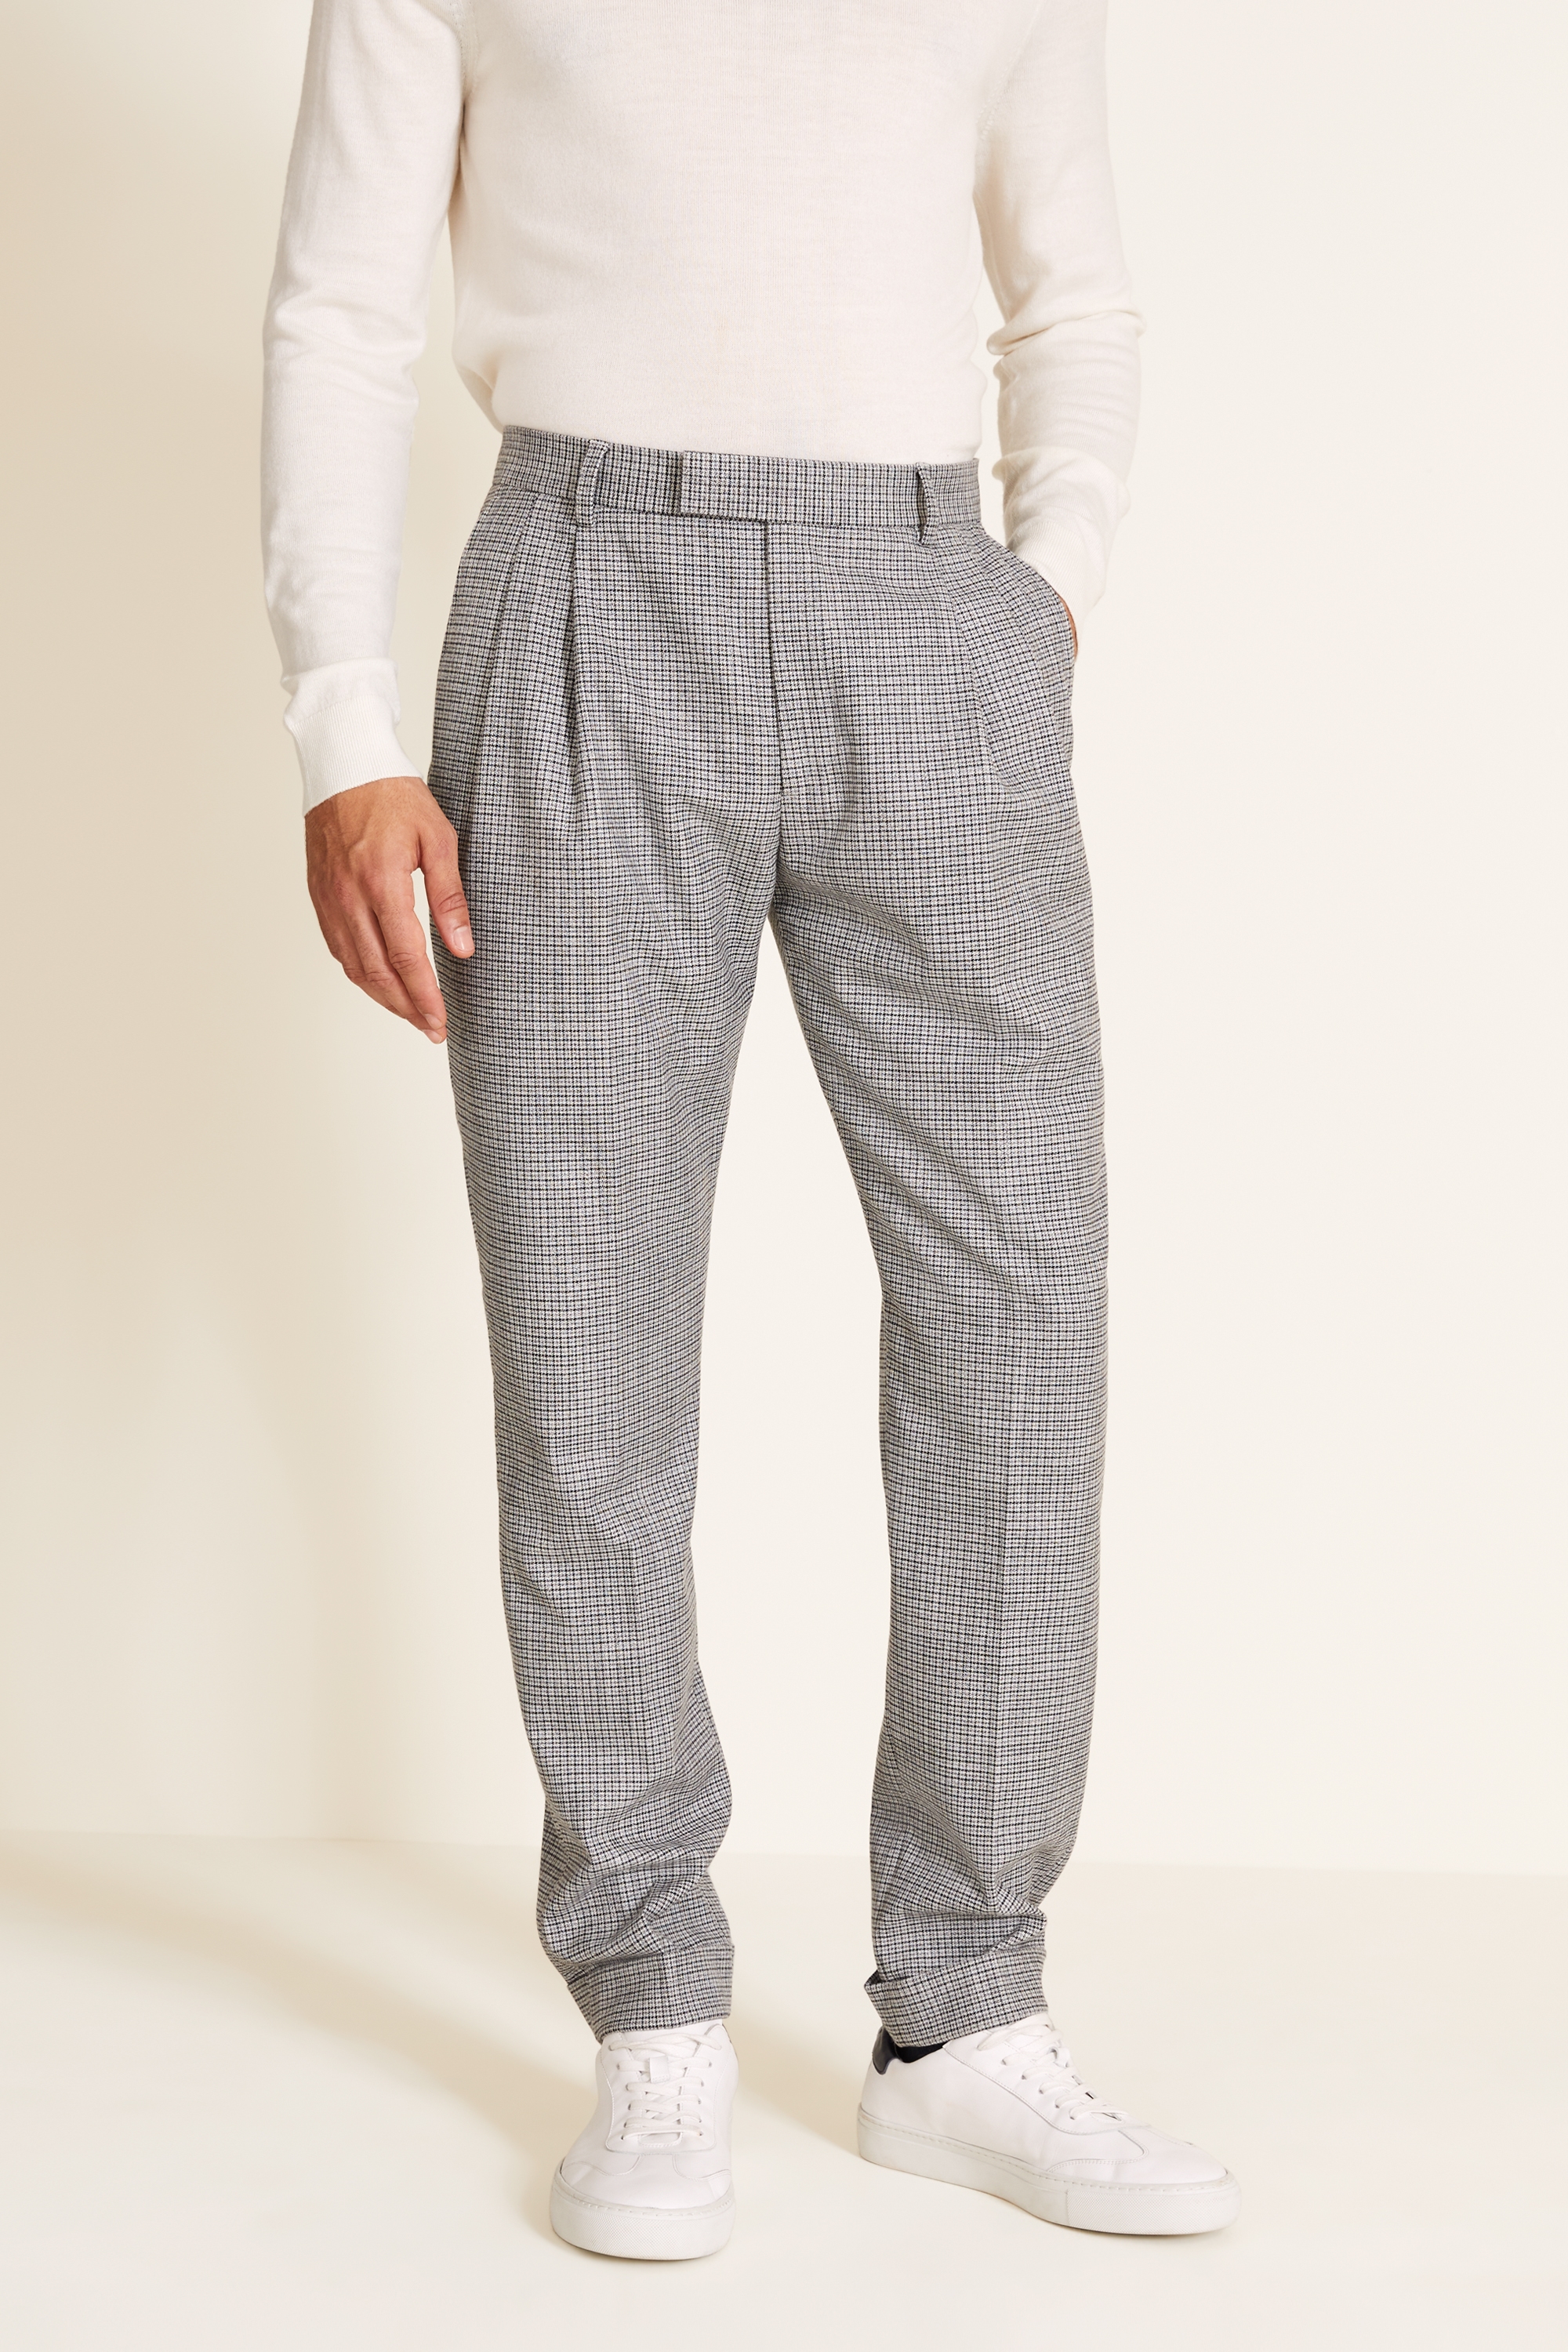 Moss 1851 Tailored Fit Light Grey Houndstooth Trousers | Buy Online at Moss